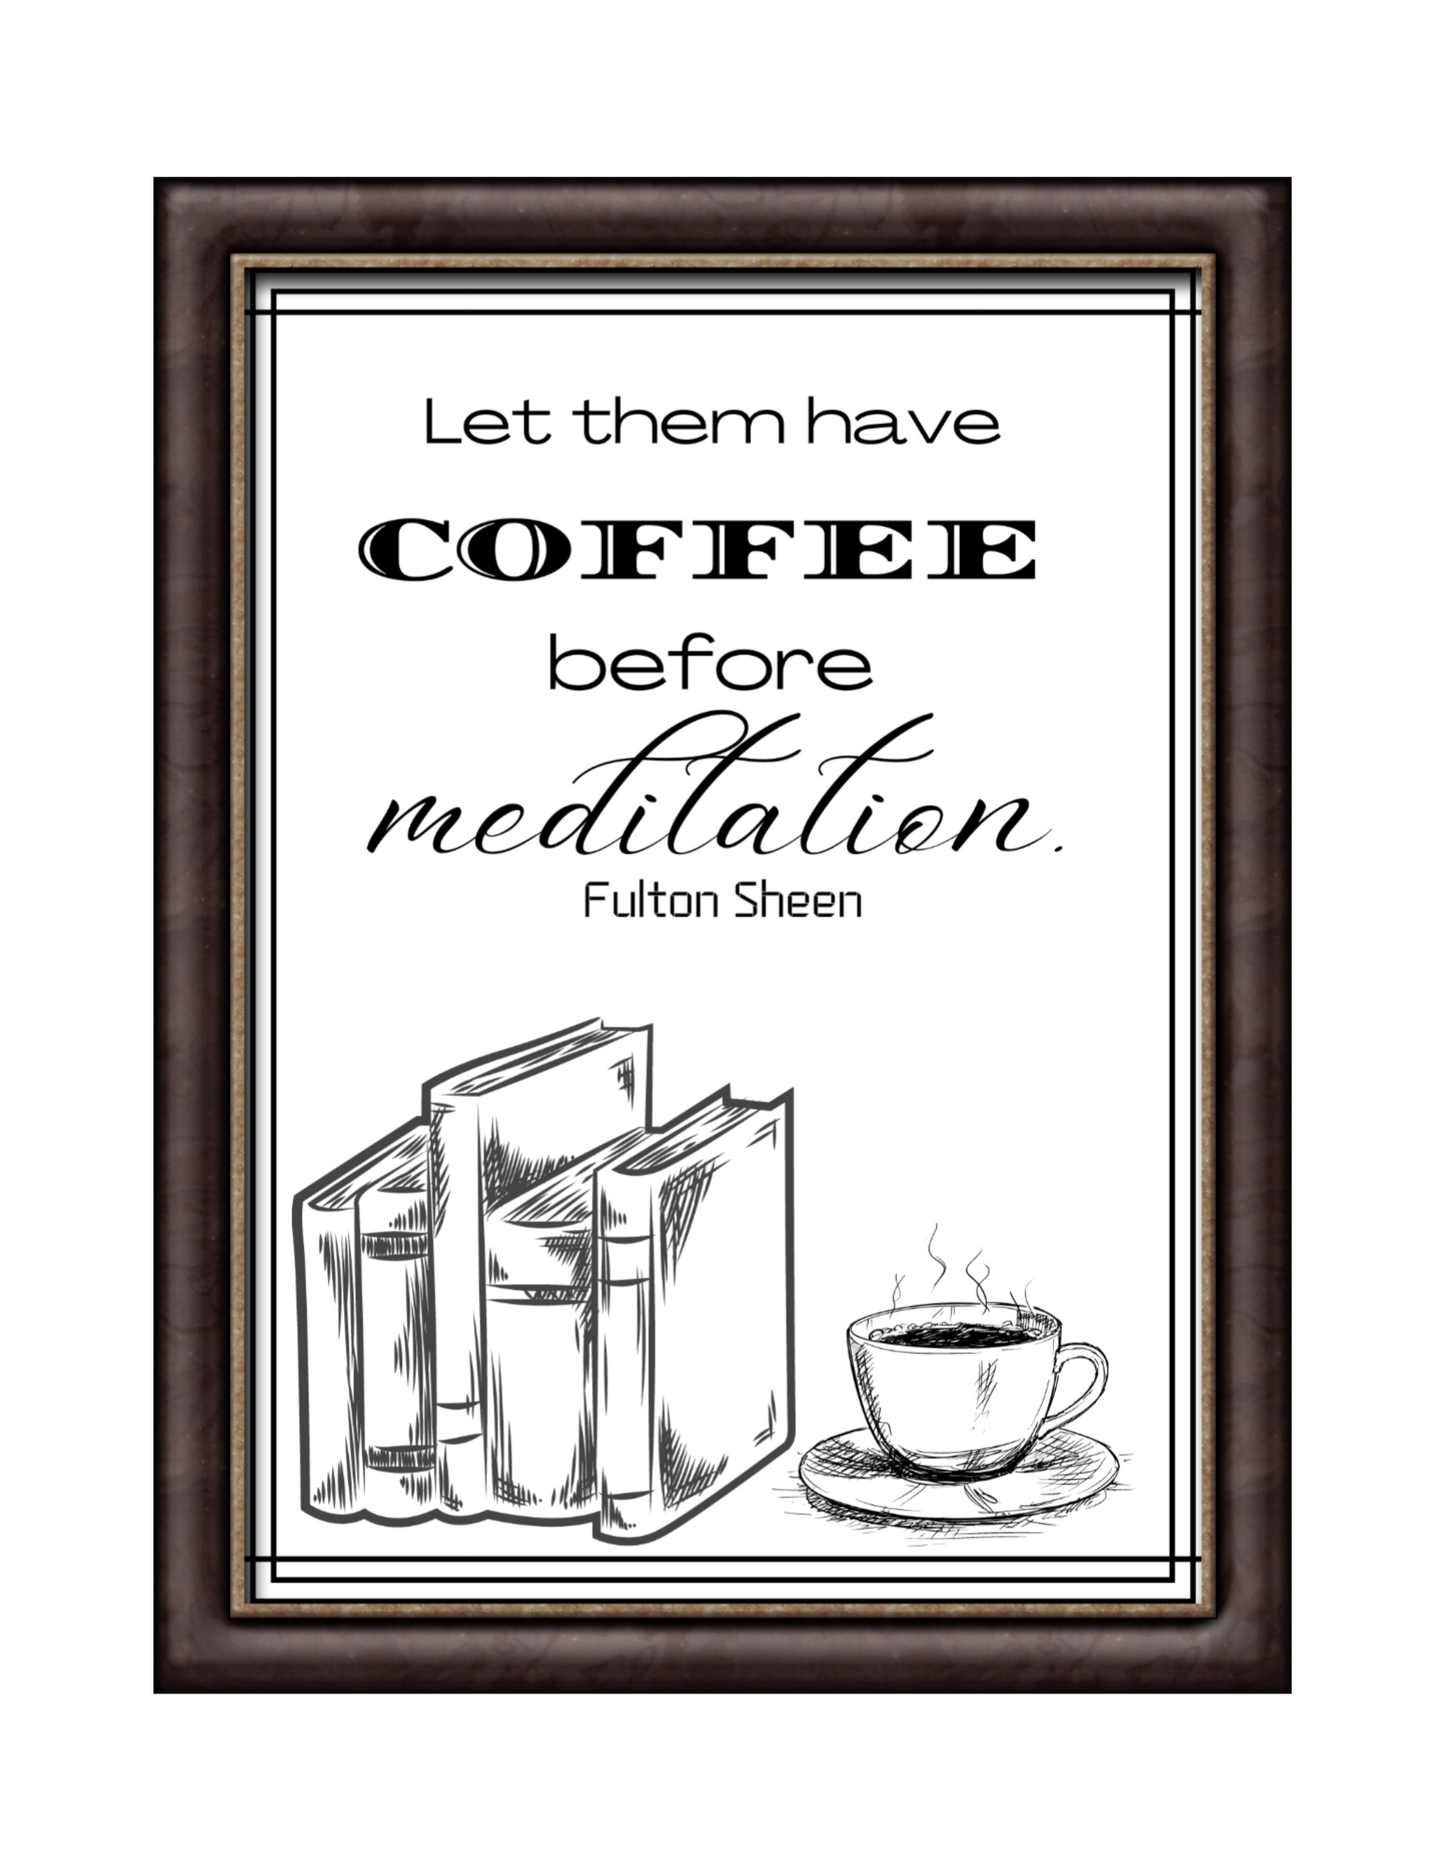 Fulton Sheen quote - Physical Print Wall Art - Coffee addict gift